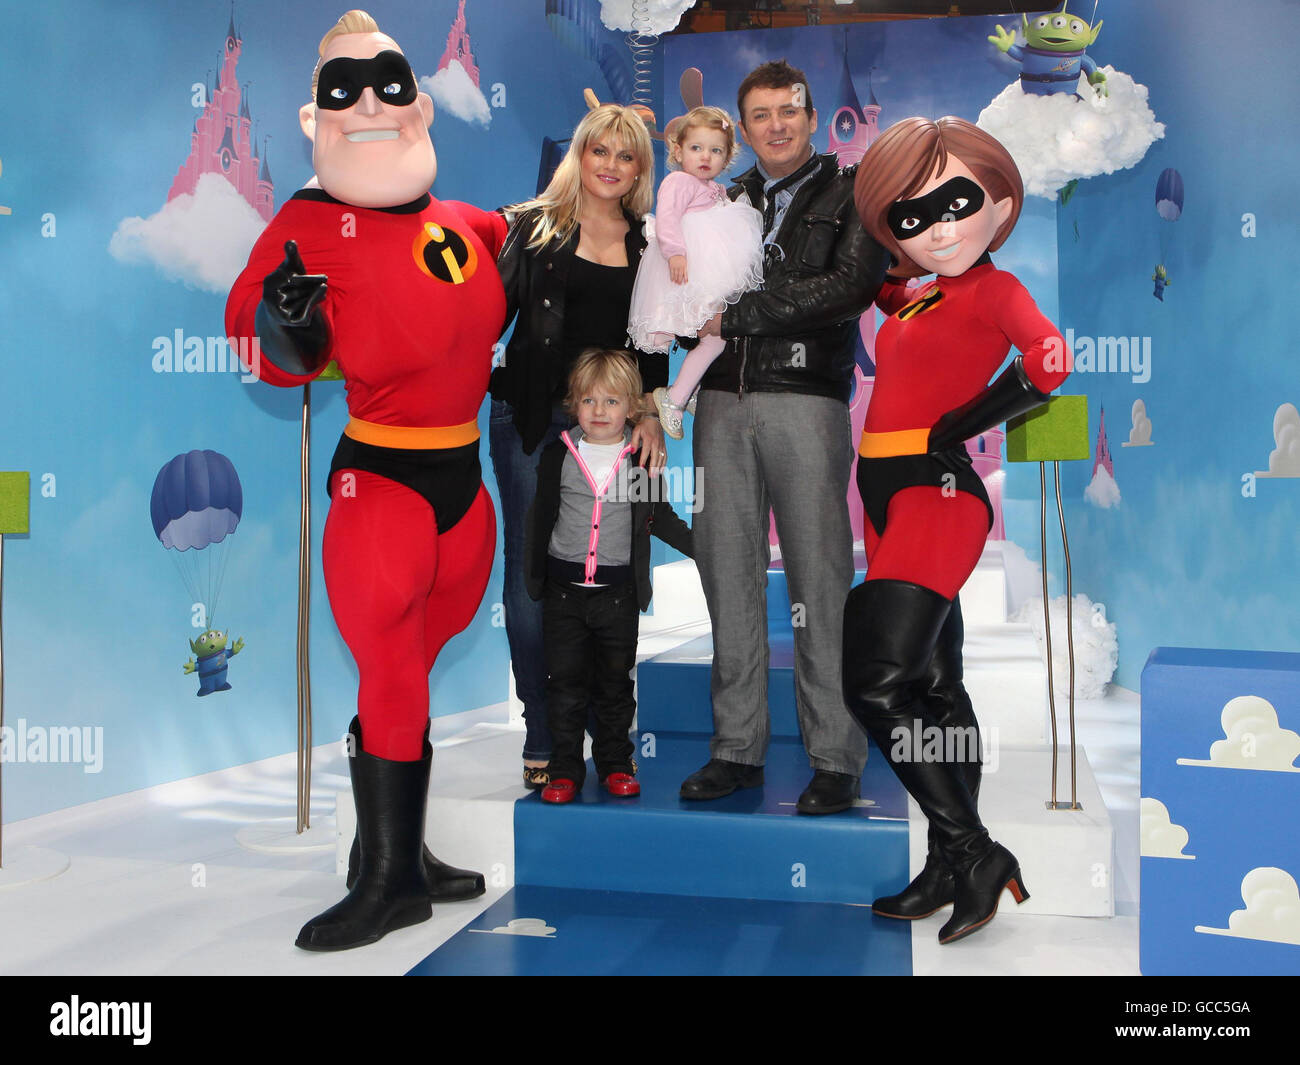 Shane Richie (2nd right) holding daughter Lolita Bell with his wife Christie Goddard and son Mackenzie Blue with people dressed as the Disney characters Mr and Mrs Incredible at the New Generation Festival launch event at Disneyland Paris. Stock Photo